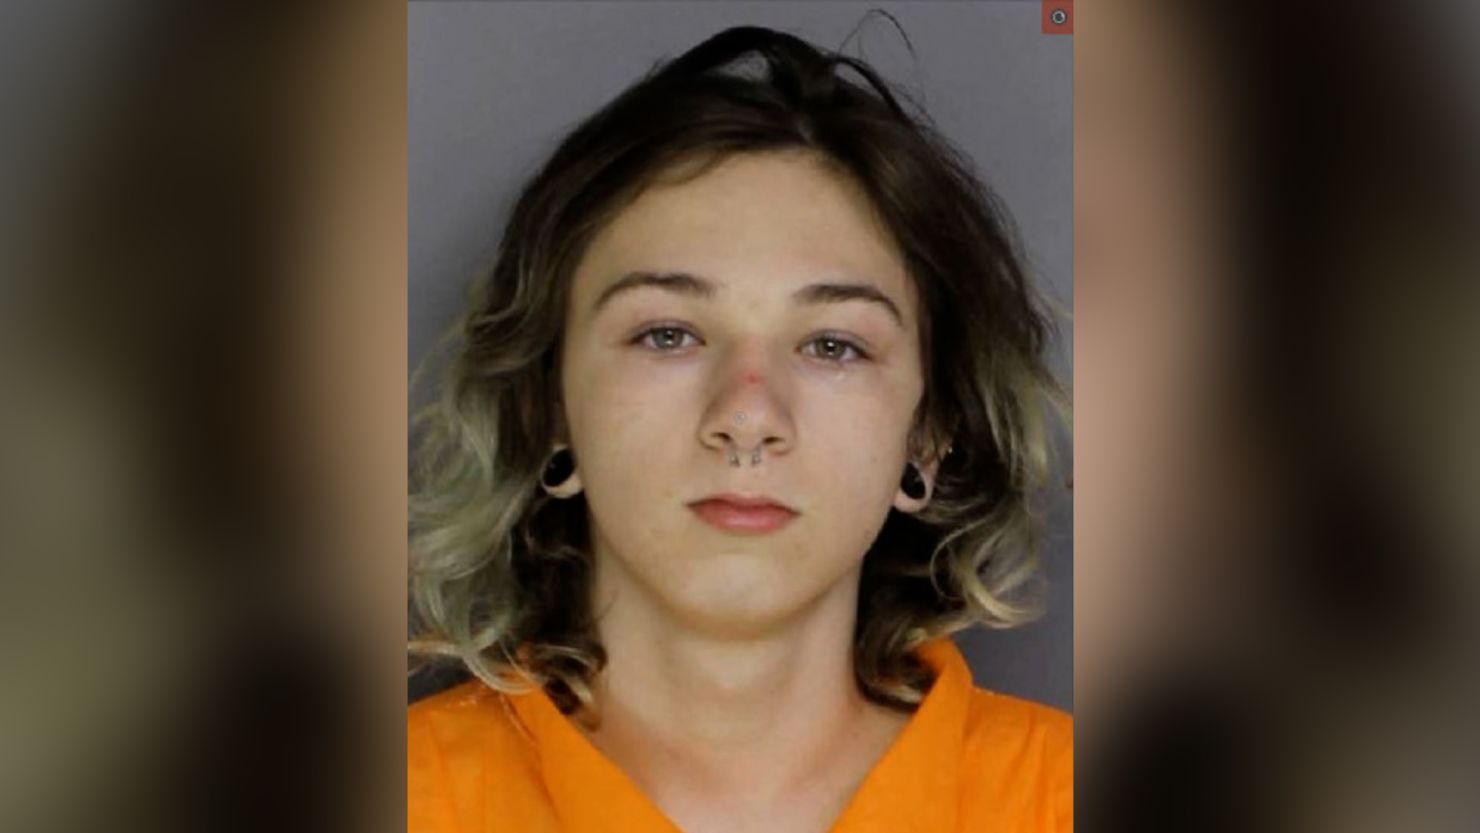 1480px x 833px - Joshua Cooper: Teen who allegedly confessed on Instagram video chat to  killing girl told police it was an 'accident,' complaint says | CNN